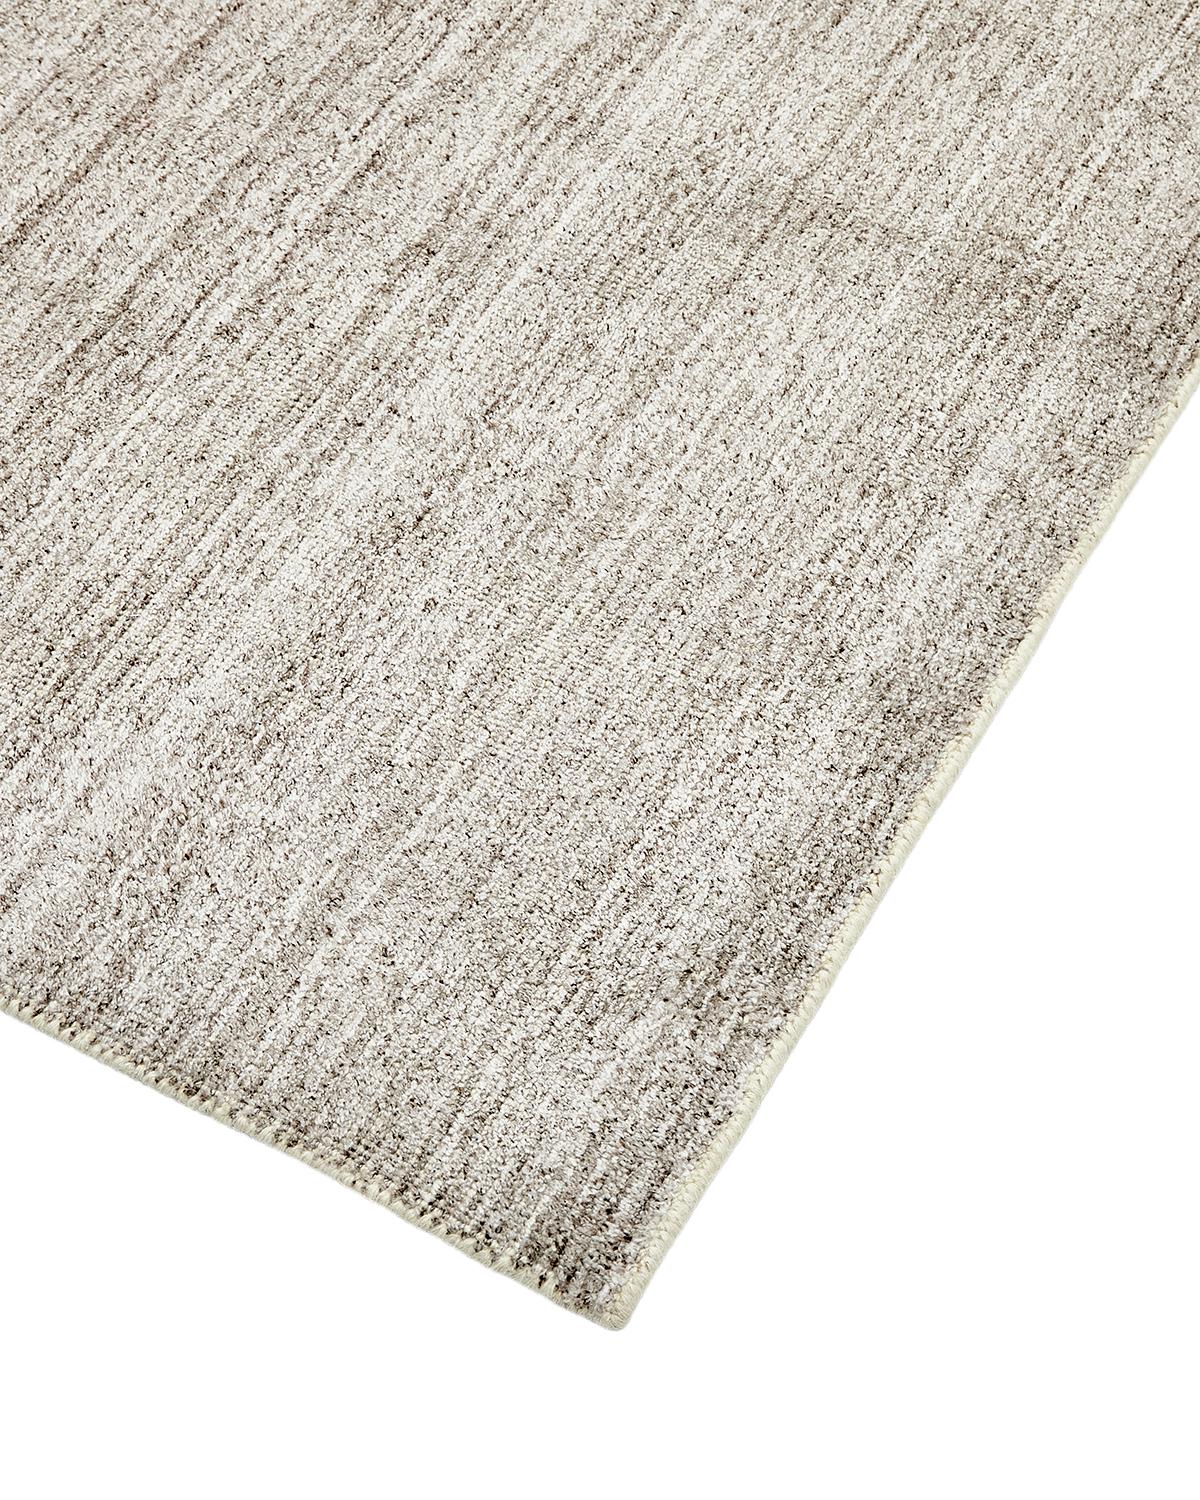 Contemporary Solo Rugs Solid Modern Hand Knotted Beige Runner Area Rug For Sale